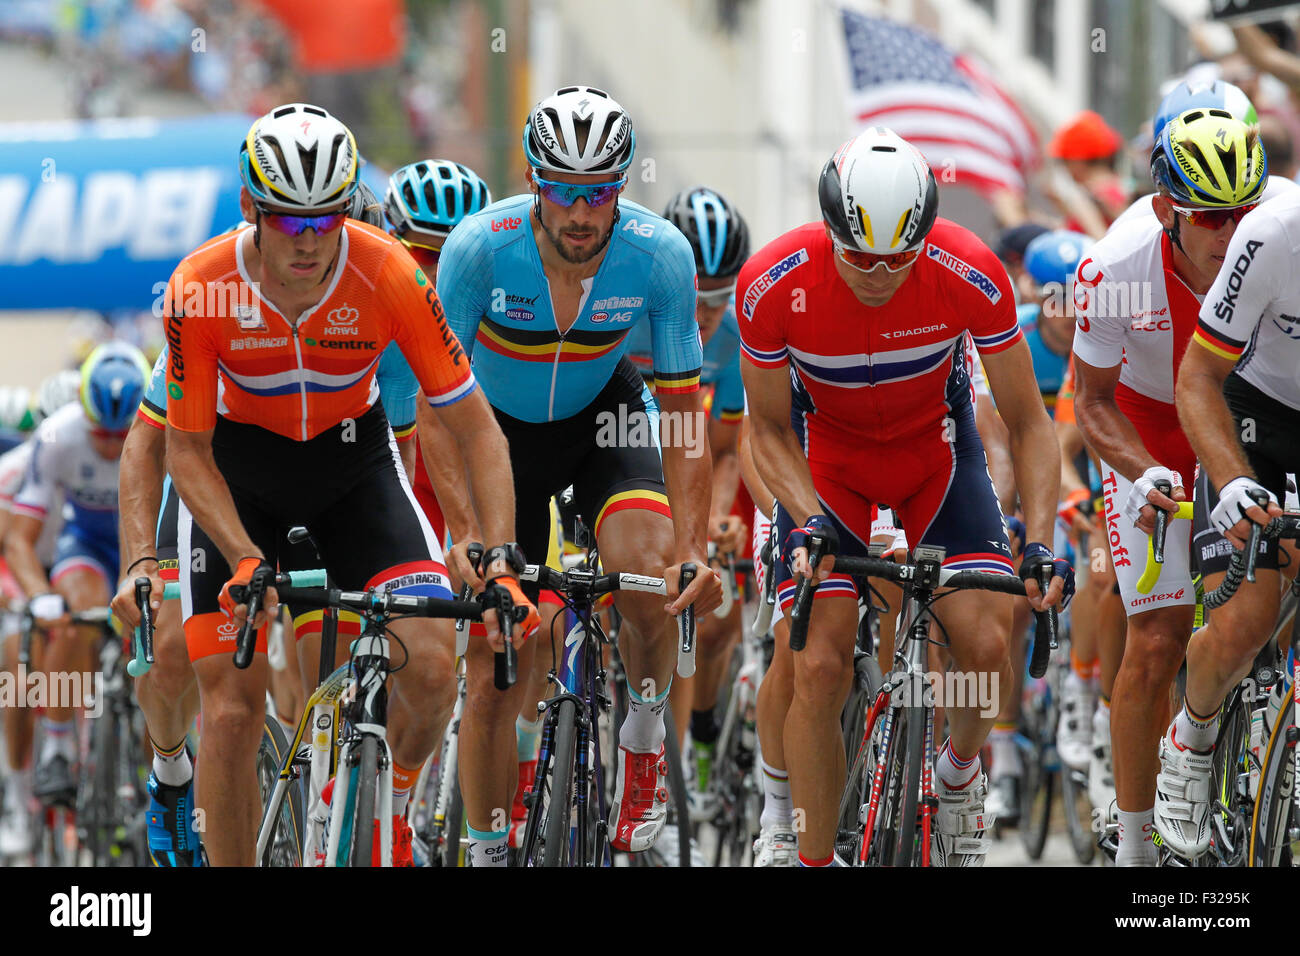 (l-r) Lars, Boom, Tom Boonen, and Edvald Boasson Hagen race at the2015 UCI World Road Championships in Richmond, Virginia. Stock Photo